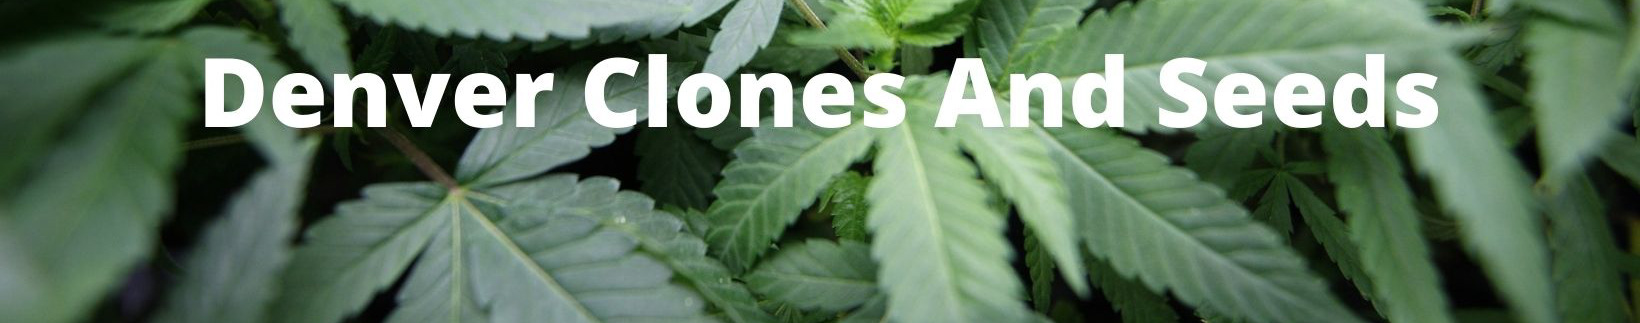 Denver Clones And Seeds's profile banner